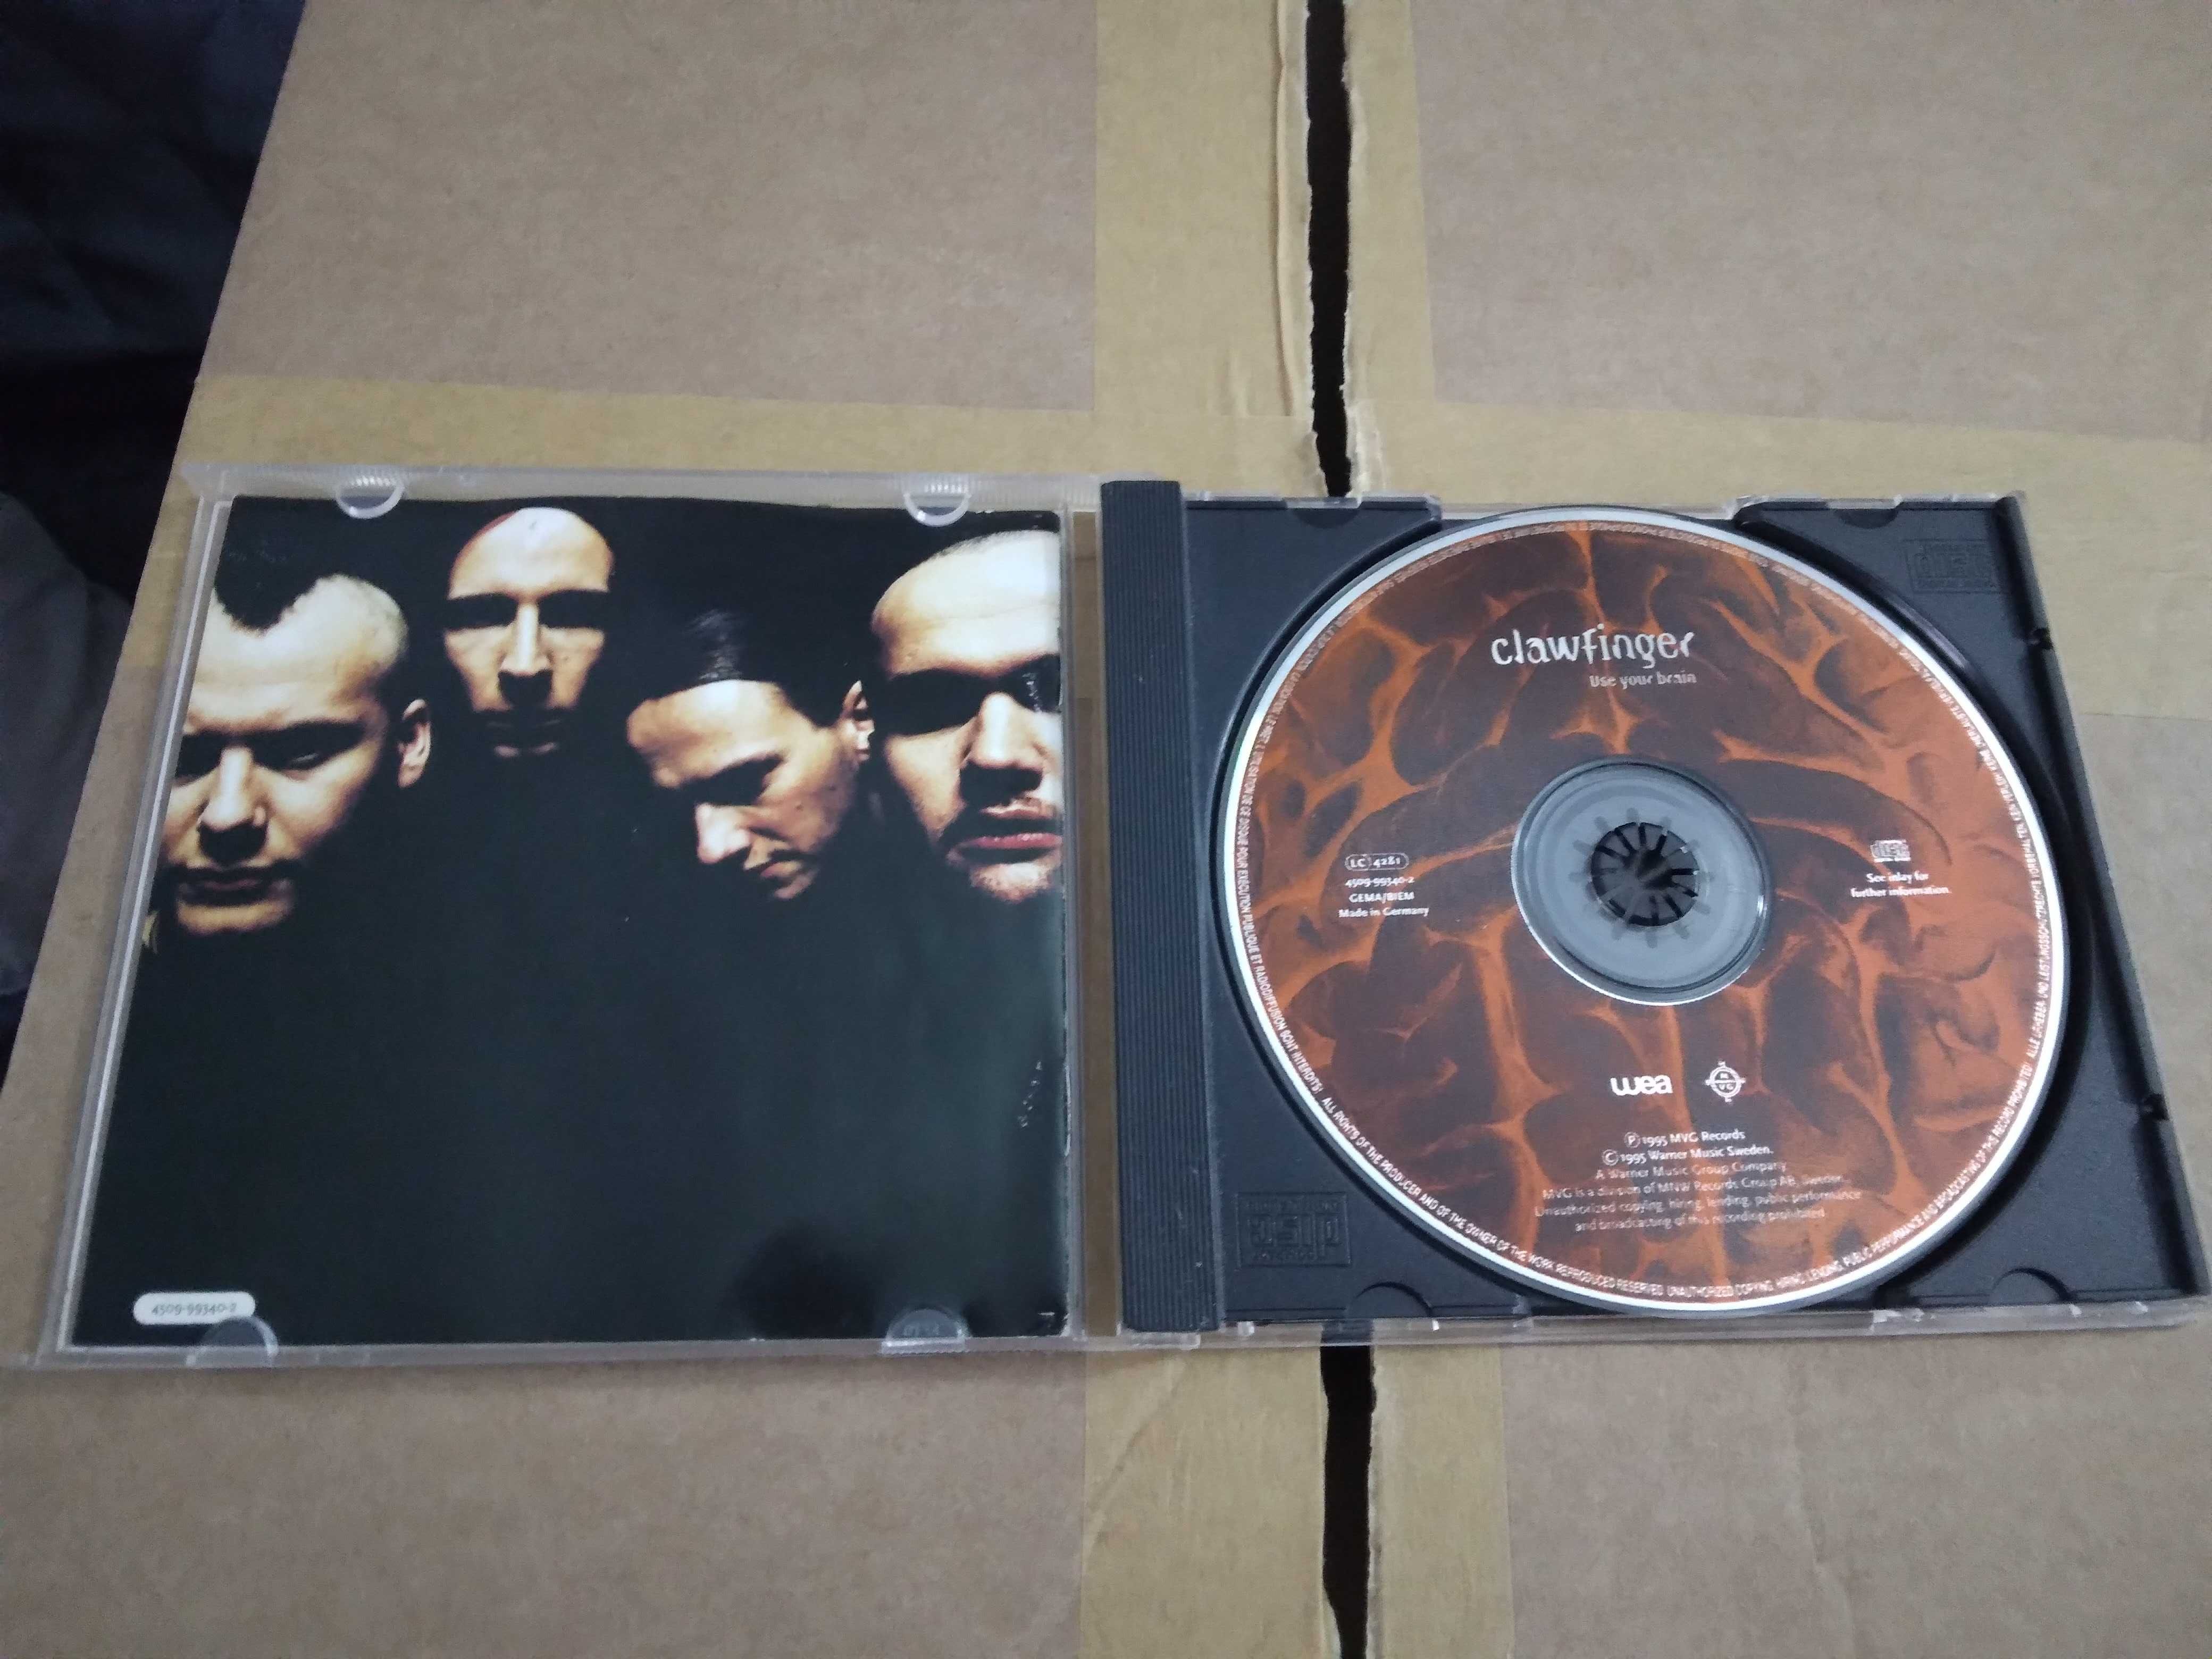 CD Clawfinger "use your brain"